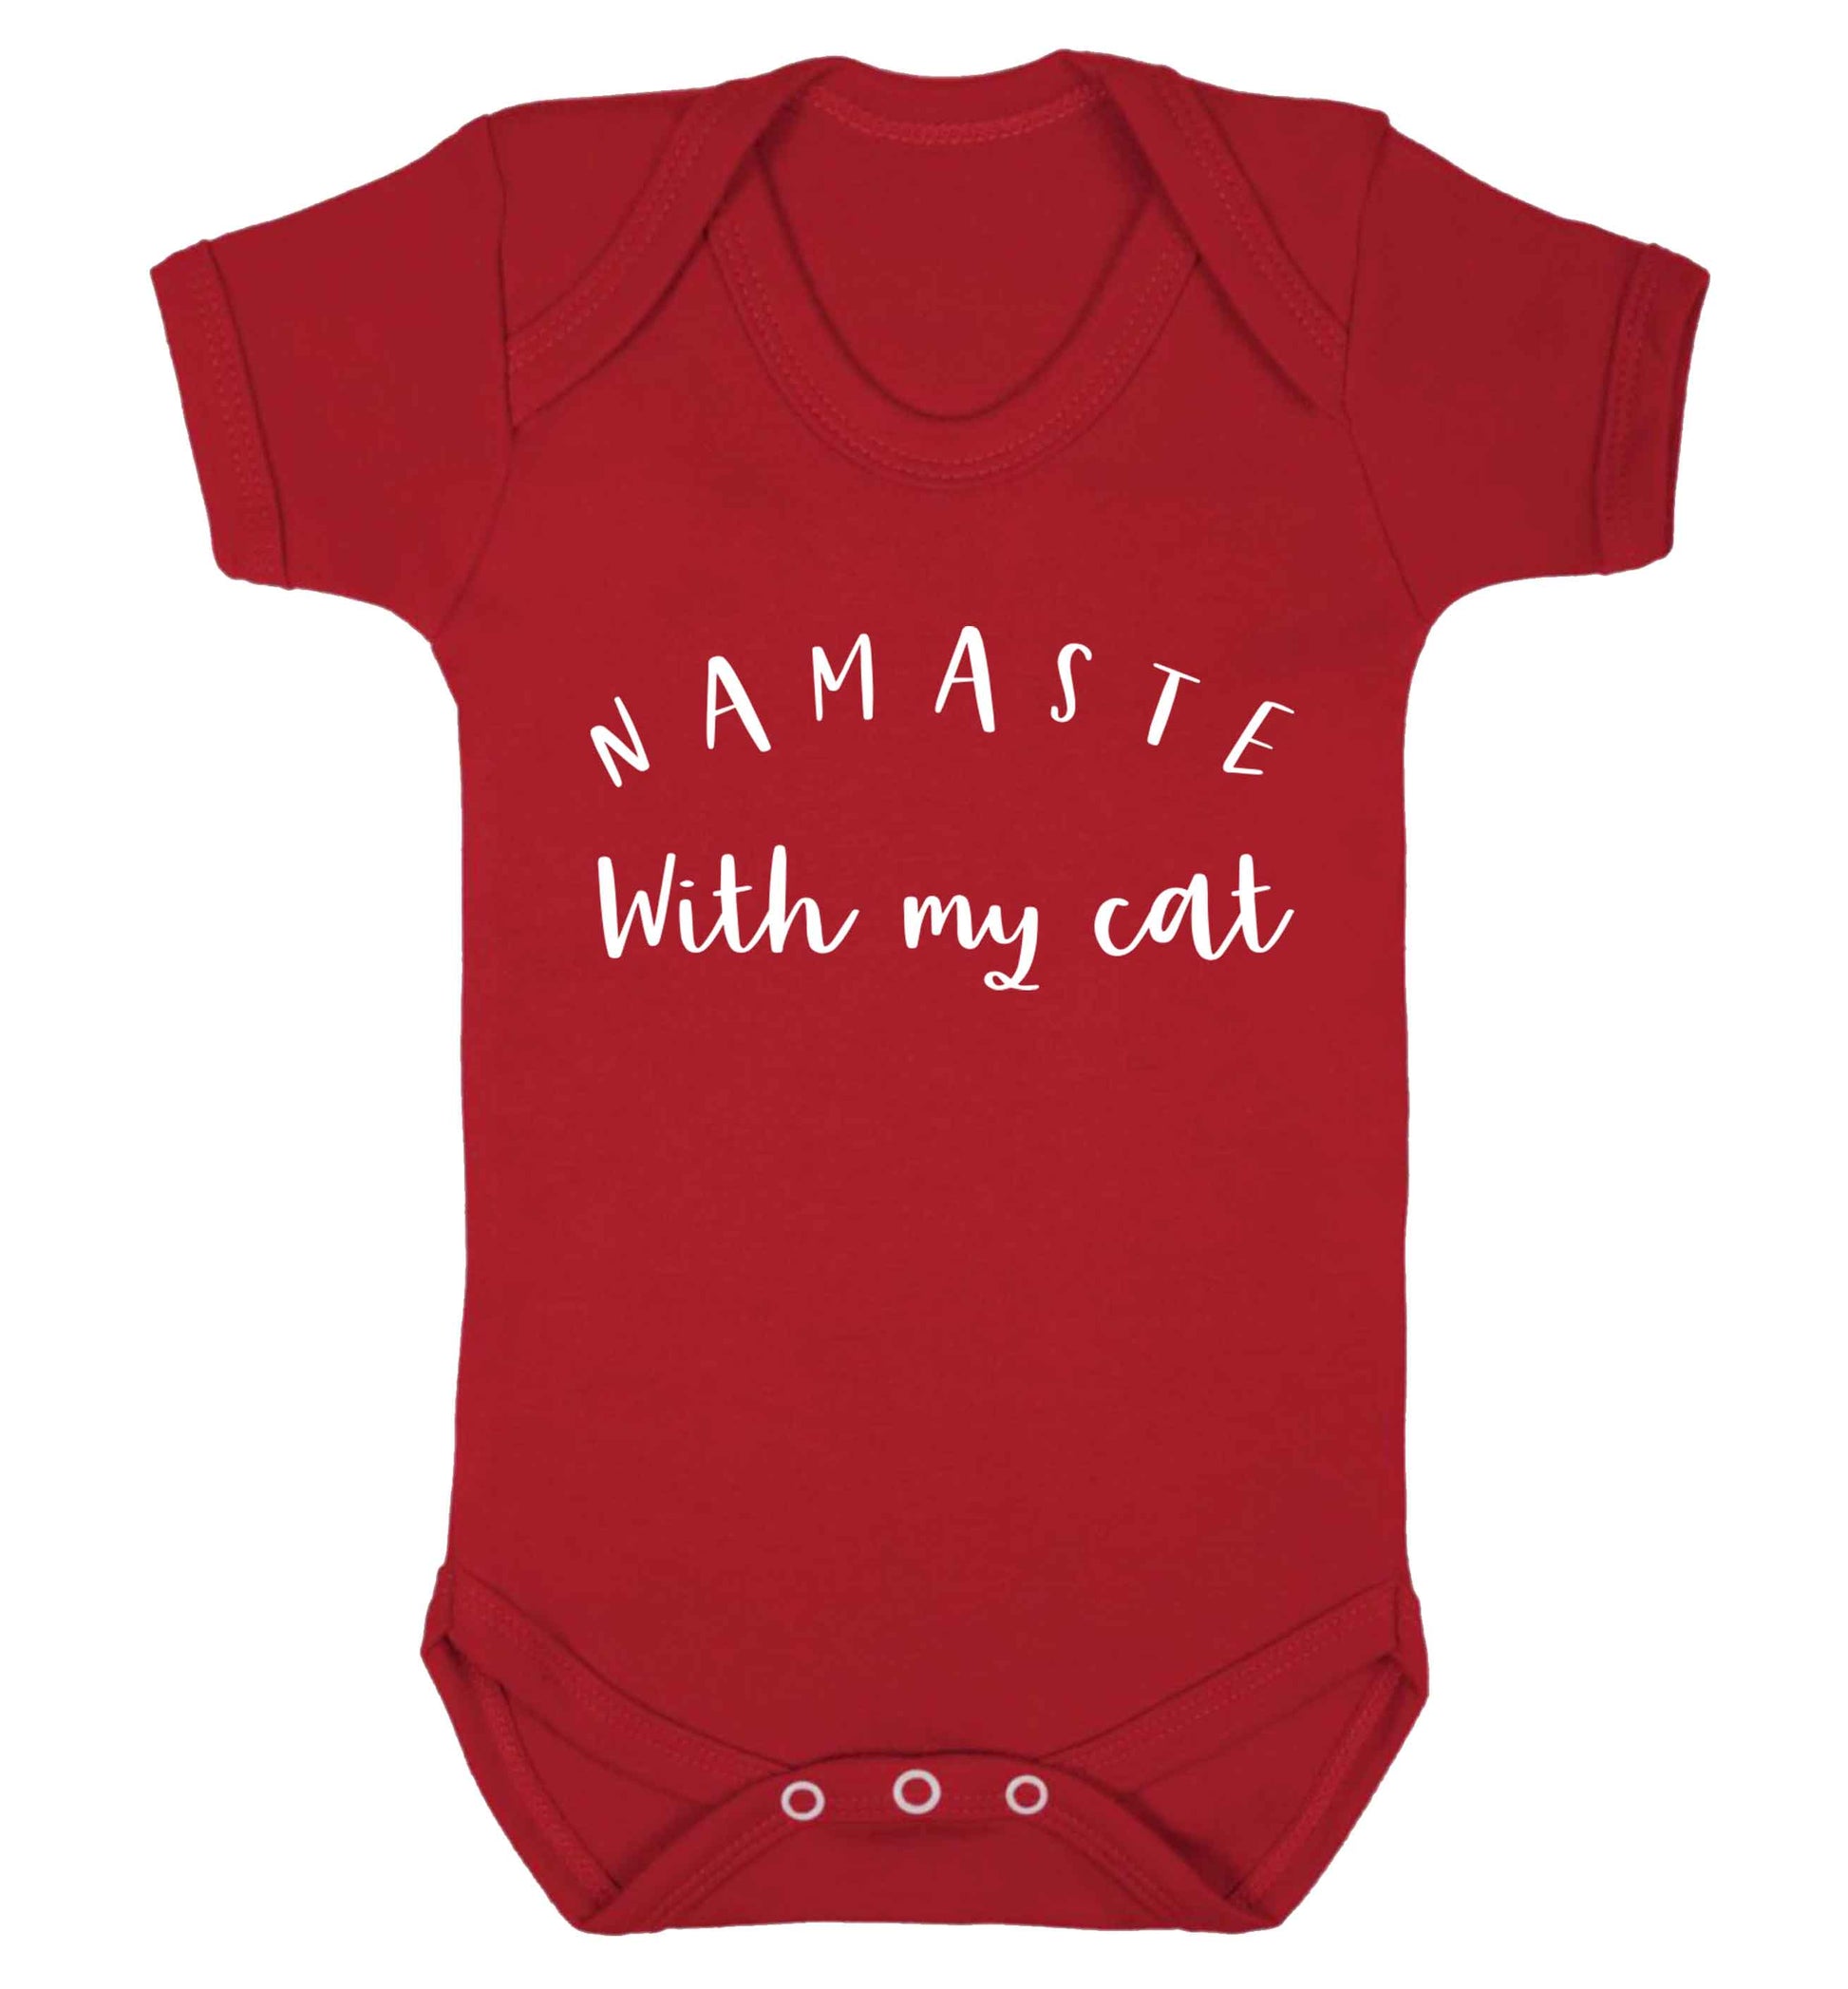 Namaste with my cat Baby Vest red 18-24 months